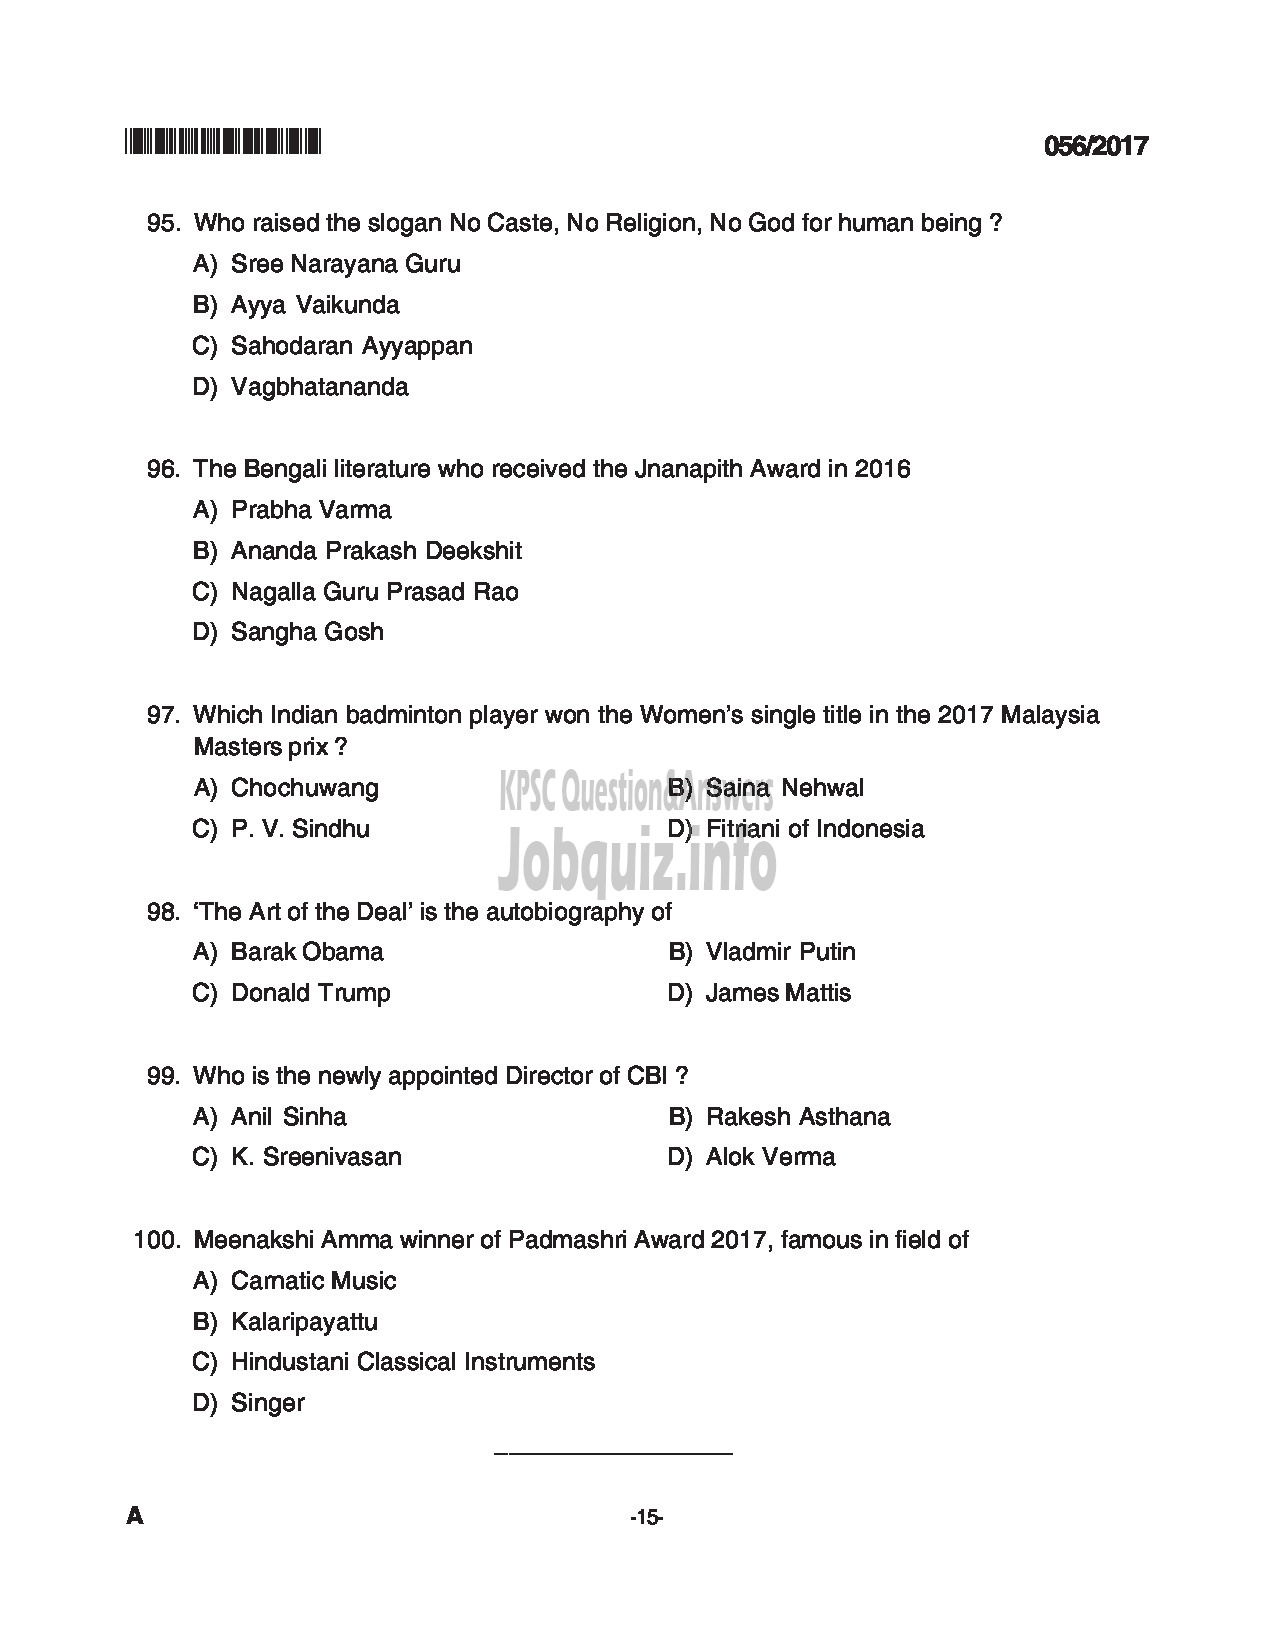 Kerala PSC Question Paper - PHARMACIST GRADE II INSURANCE MEDICAL SERVICES QUESTION PAPER-15